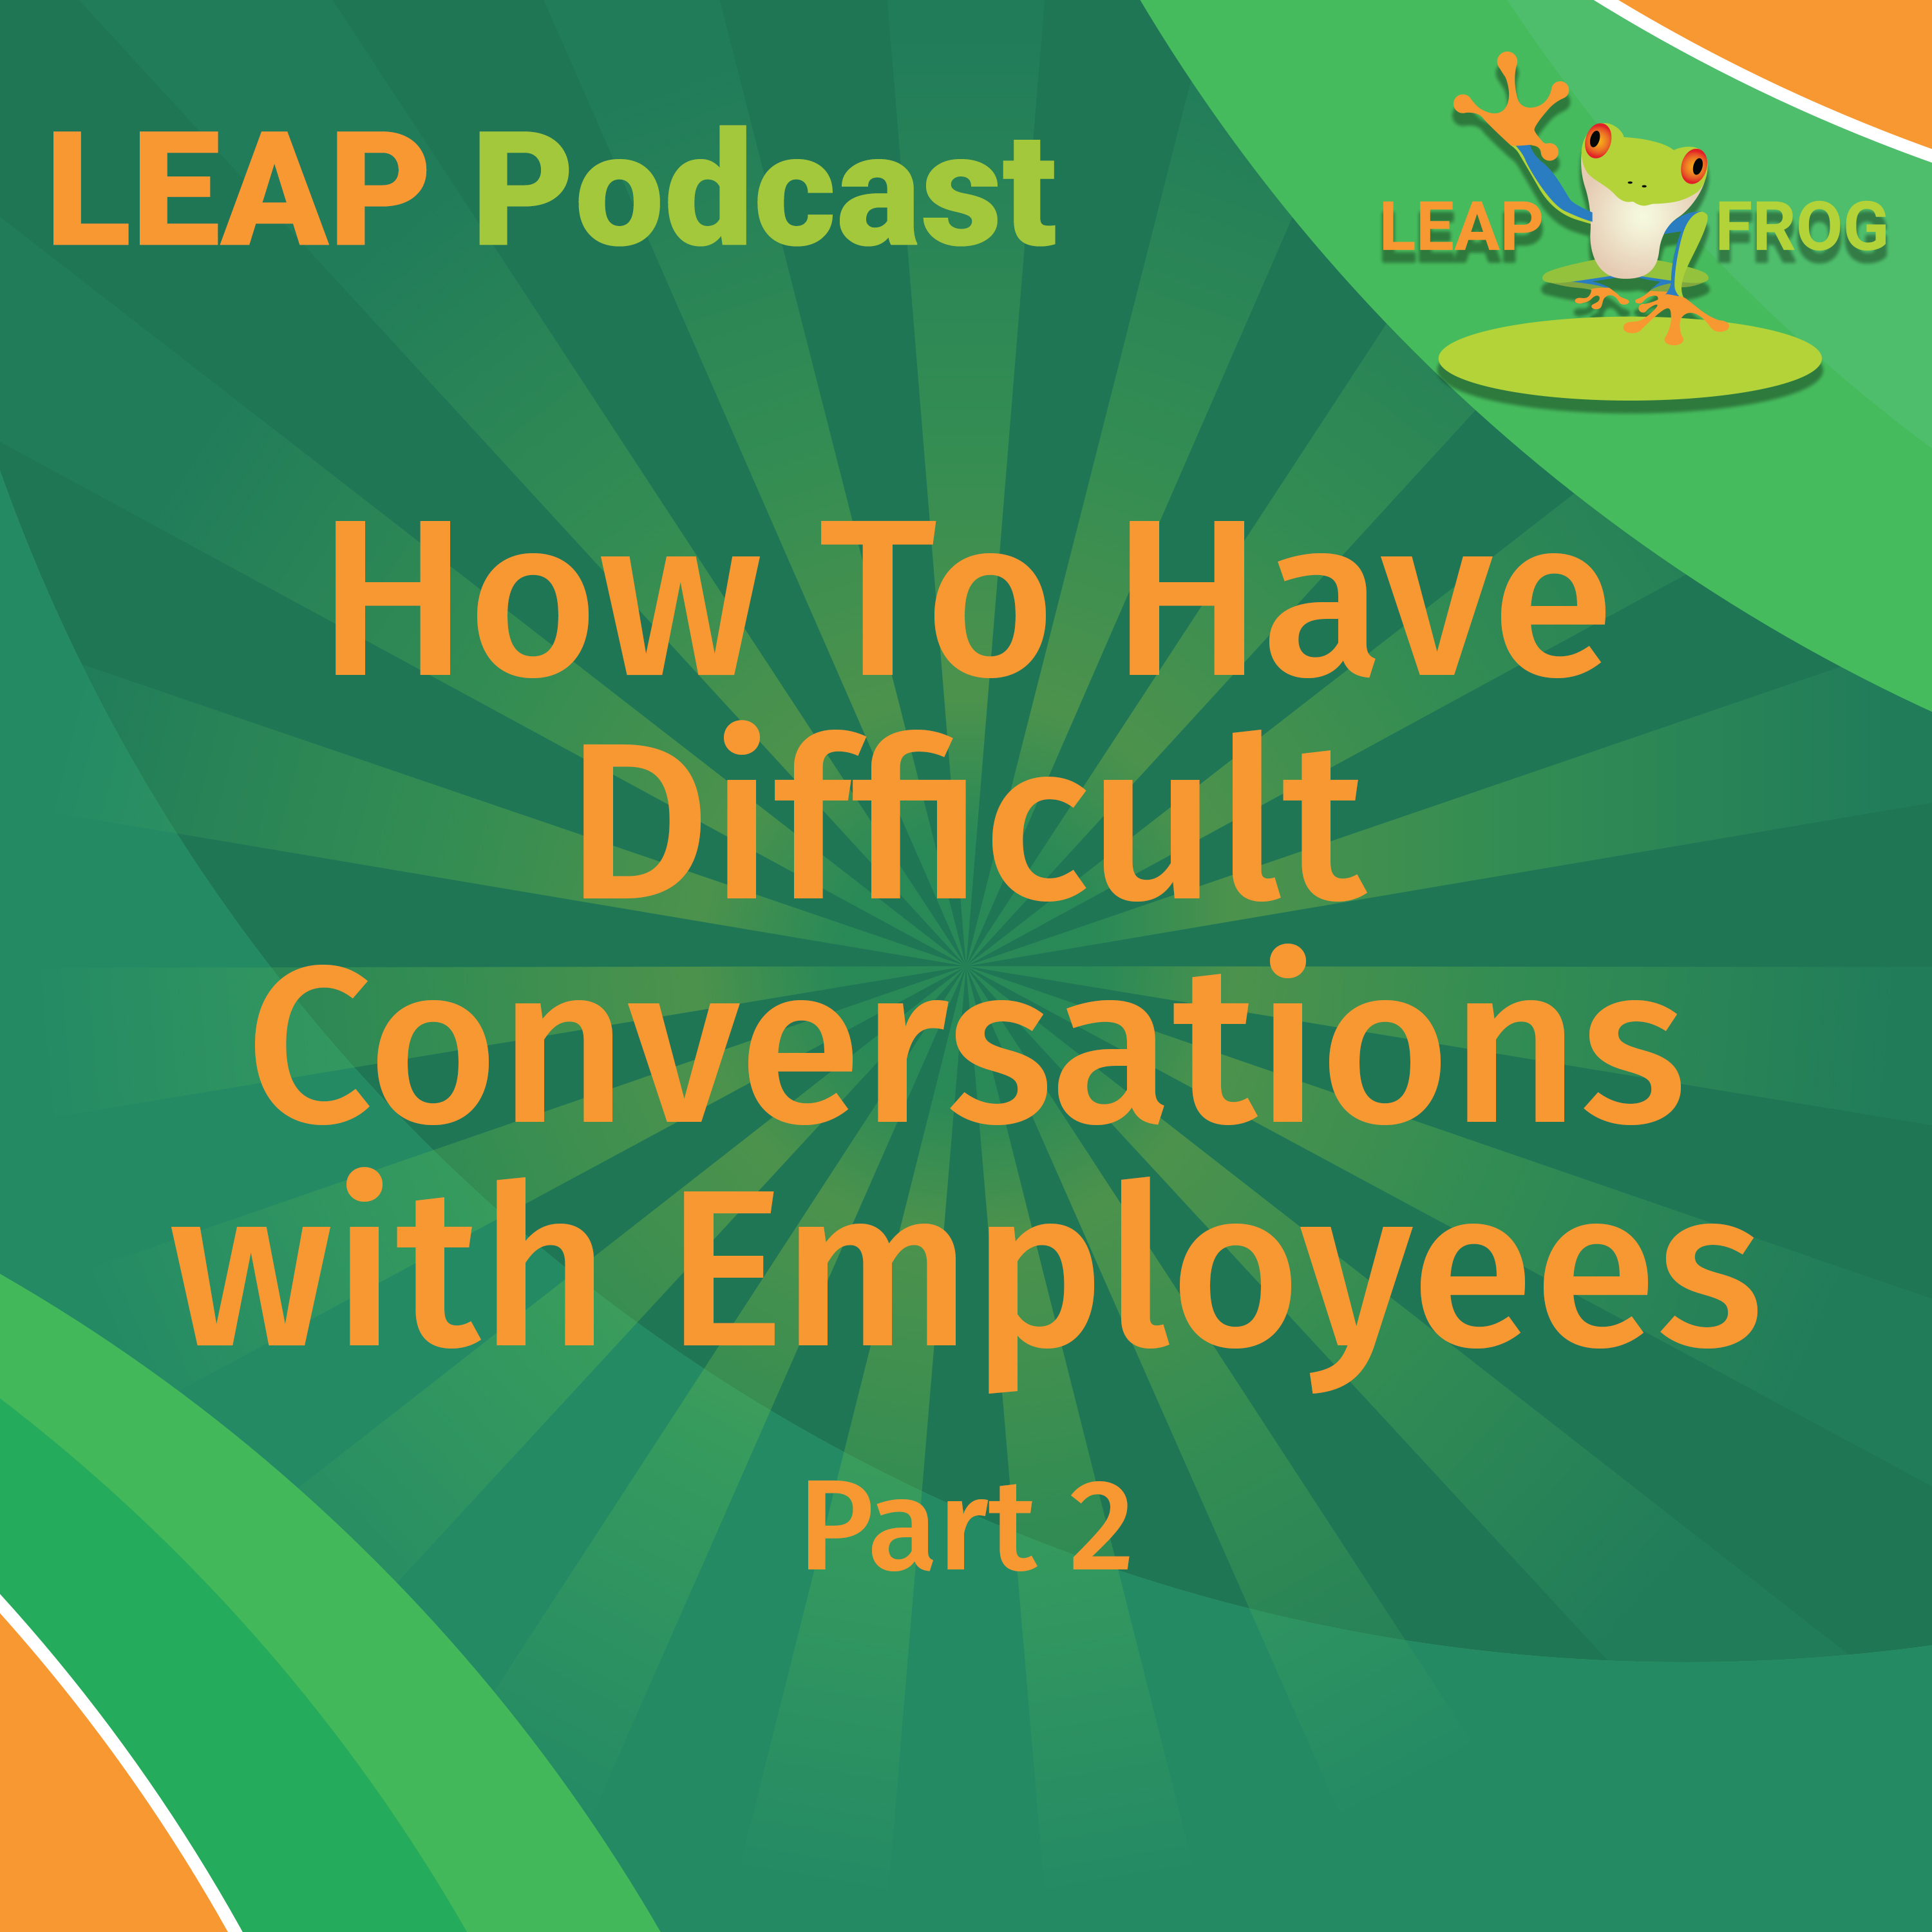 LEAP Podcast How To Have Difficult Conversations with Employees, Part 2 episode cover art